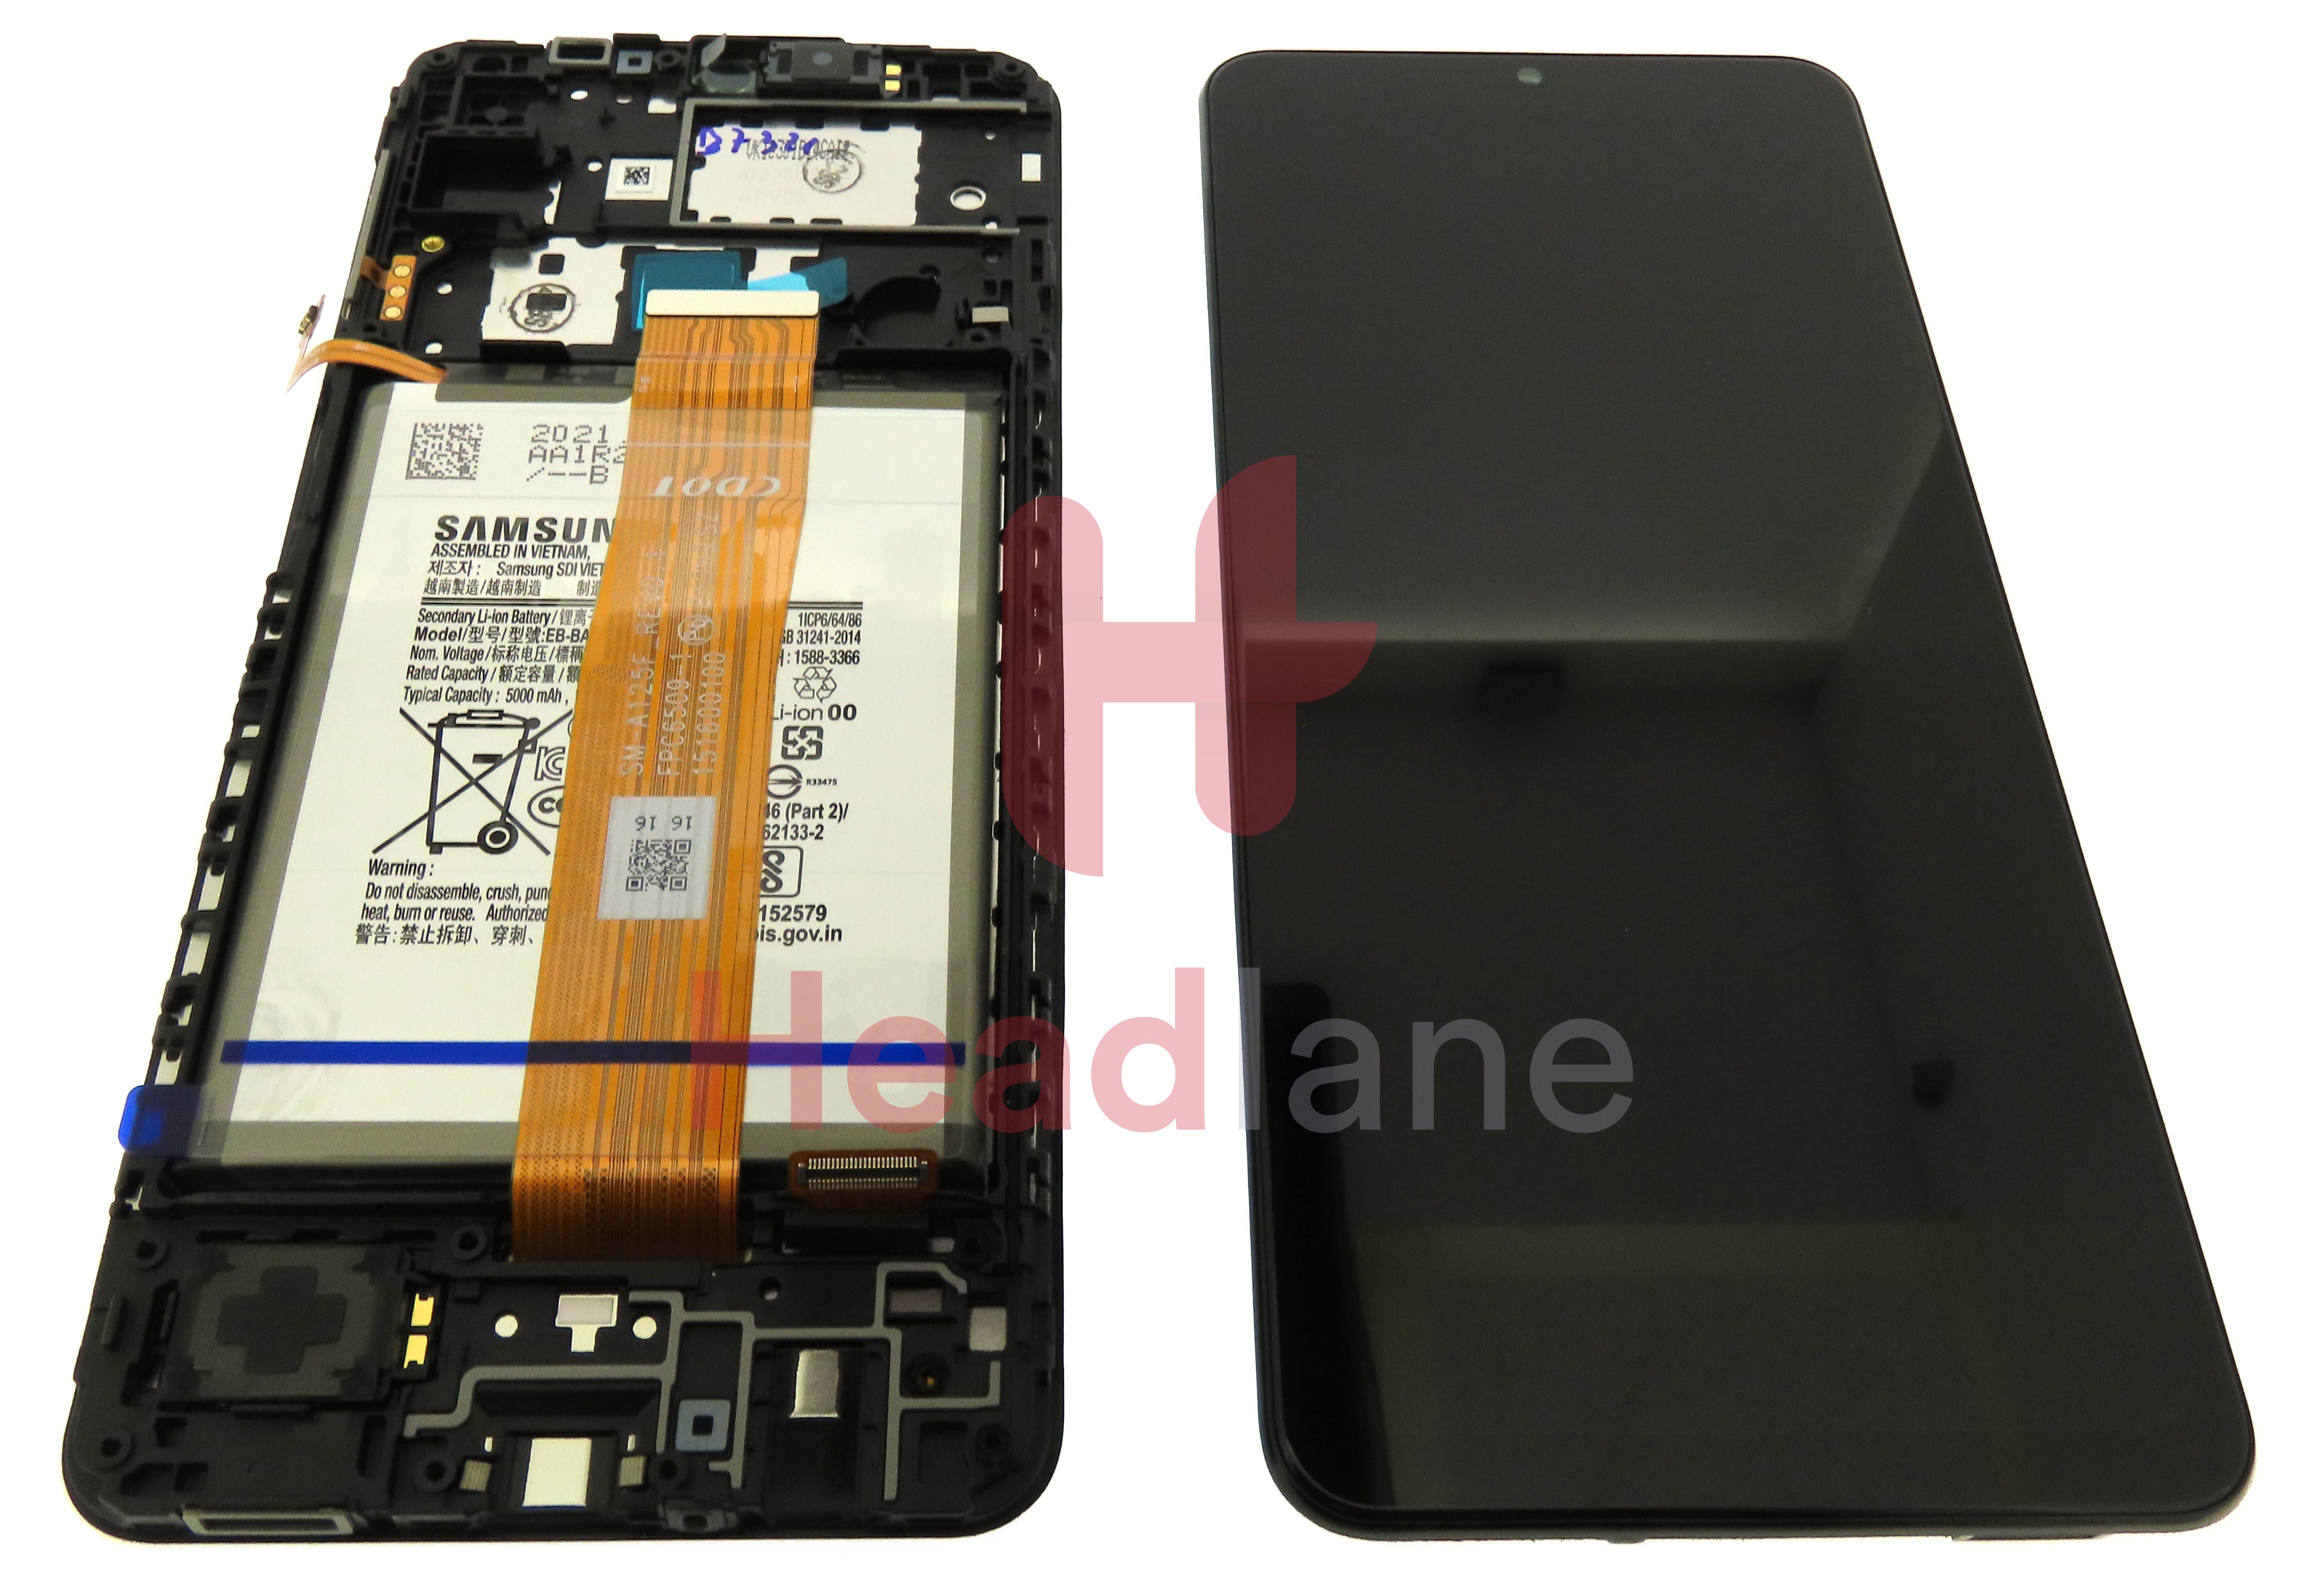 Samsung SM-A125 Galaxy A12 LCD Display / Screen + Touch + Battery